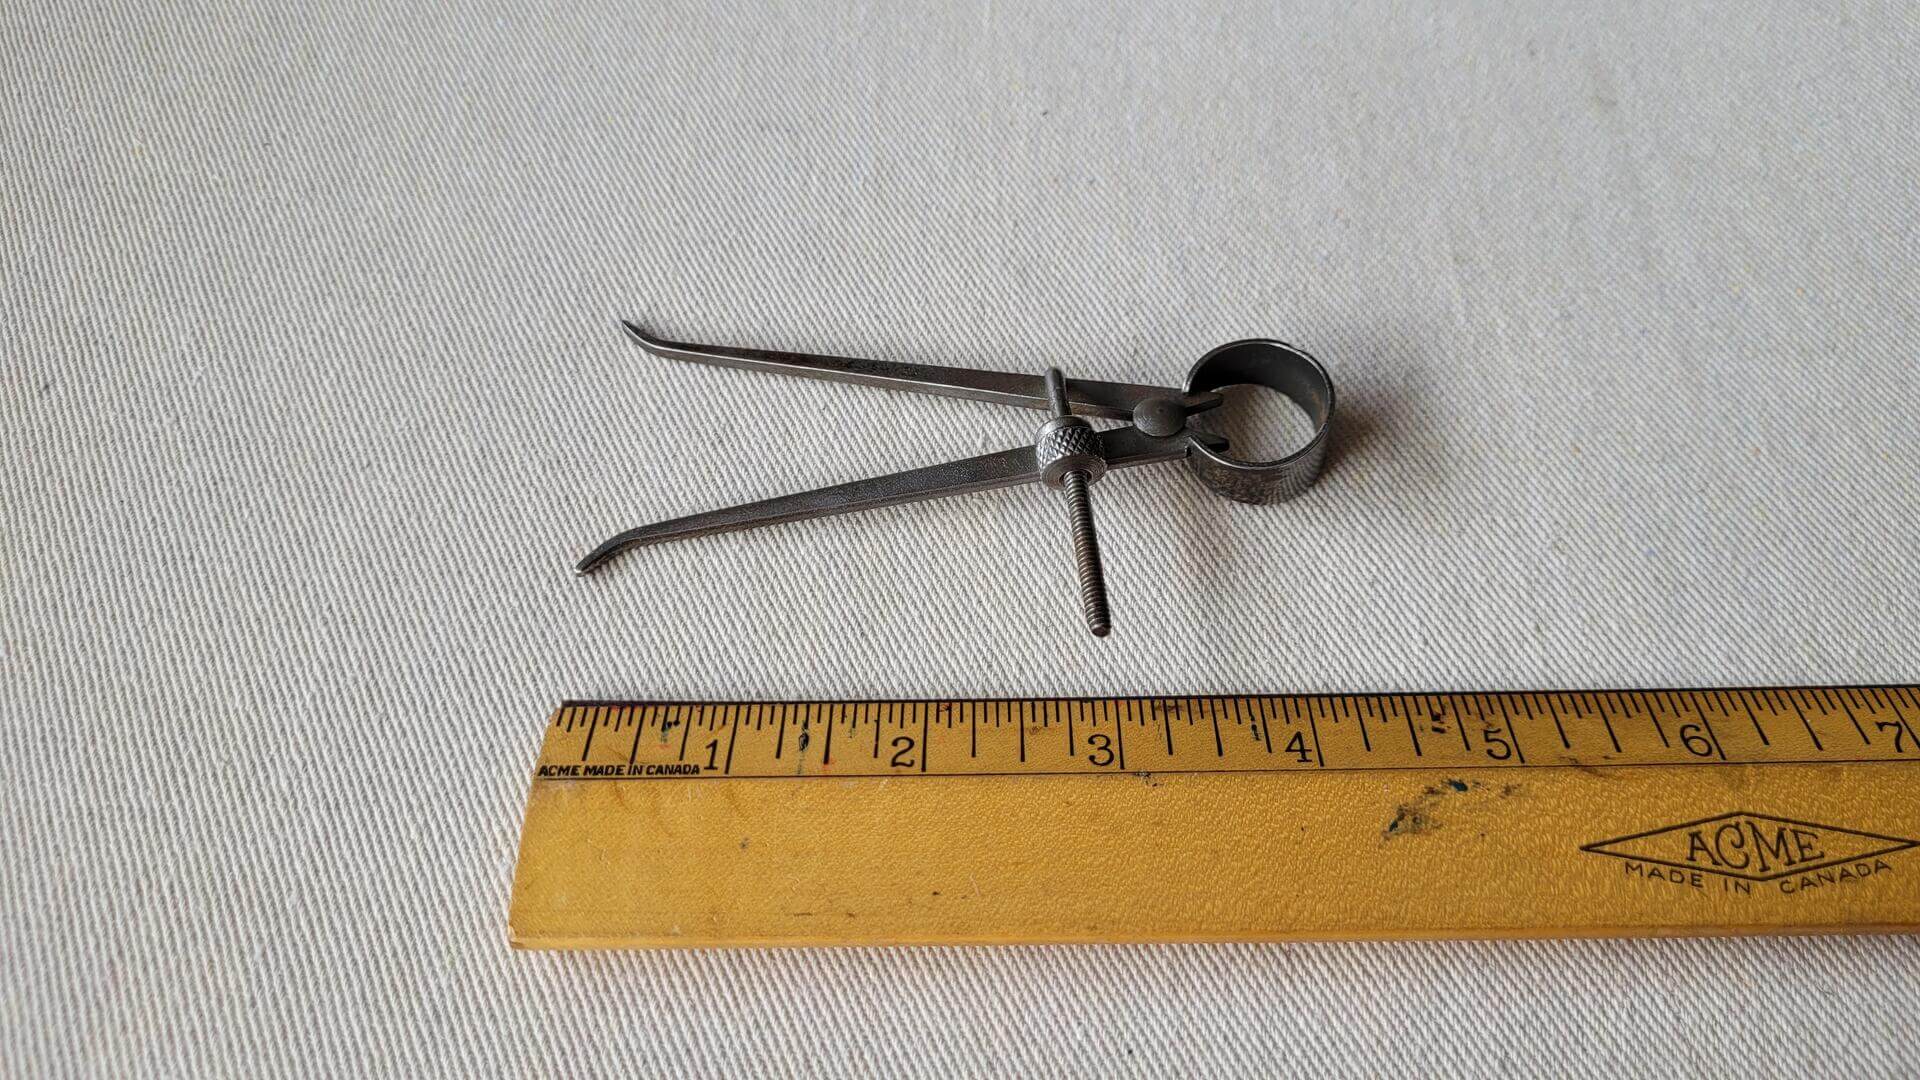 Vintage inside and outside spring divider calipers set. Antique collectible marking and measuring woodworking and machinist hand tools